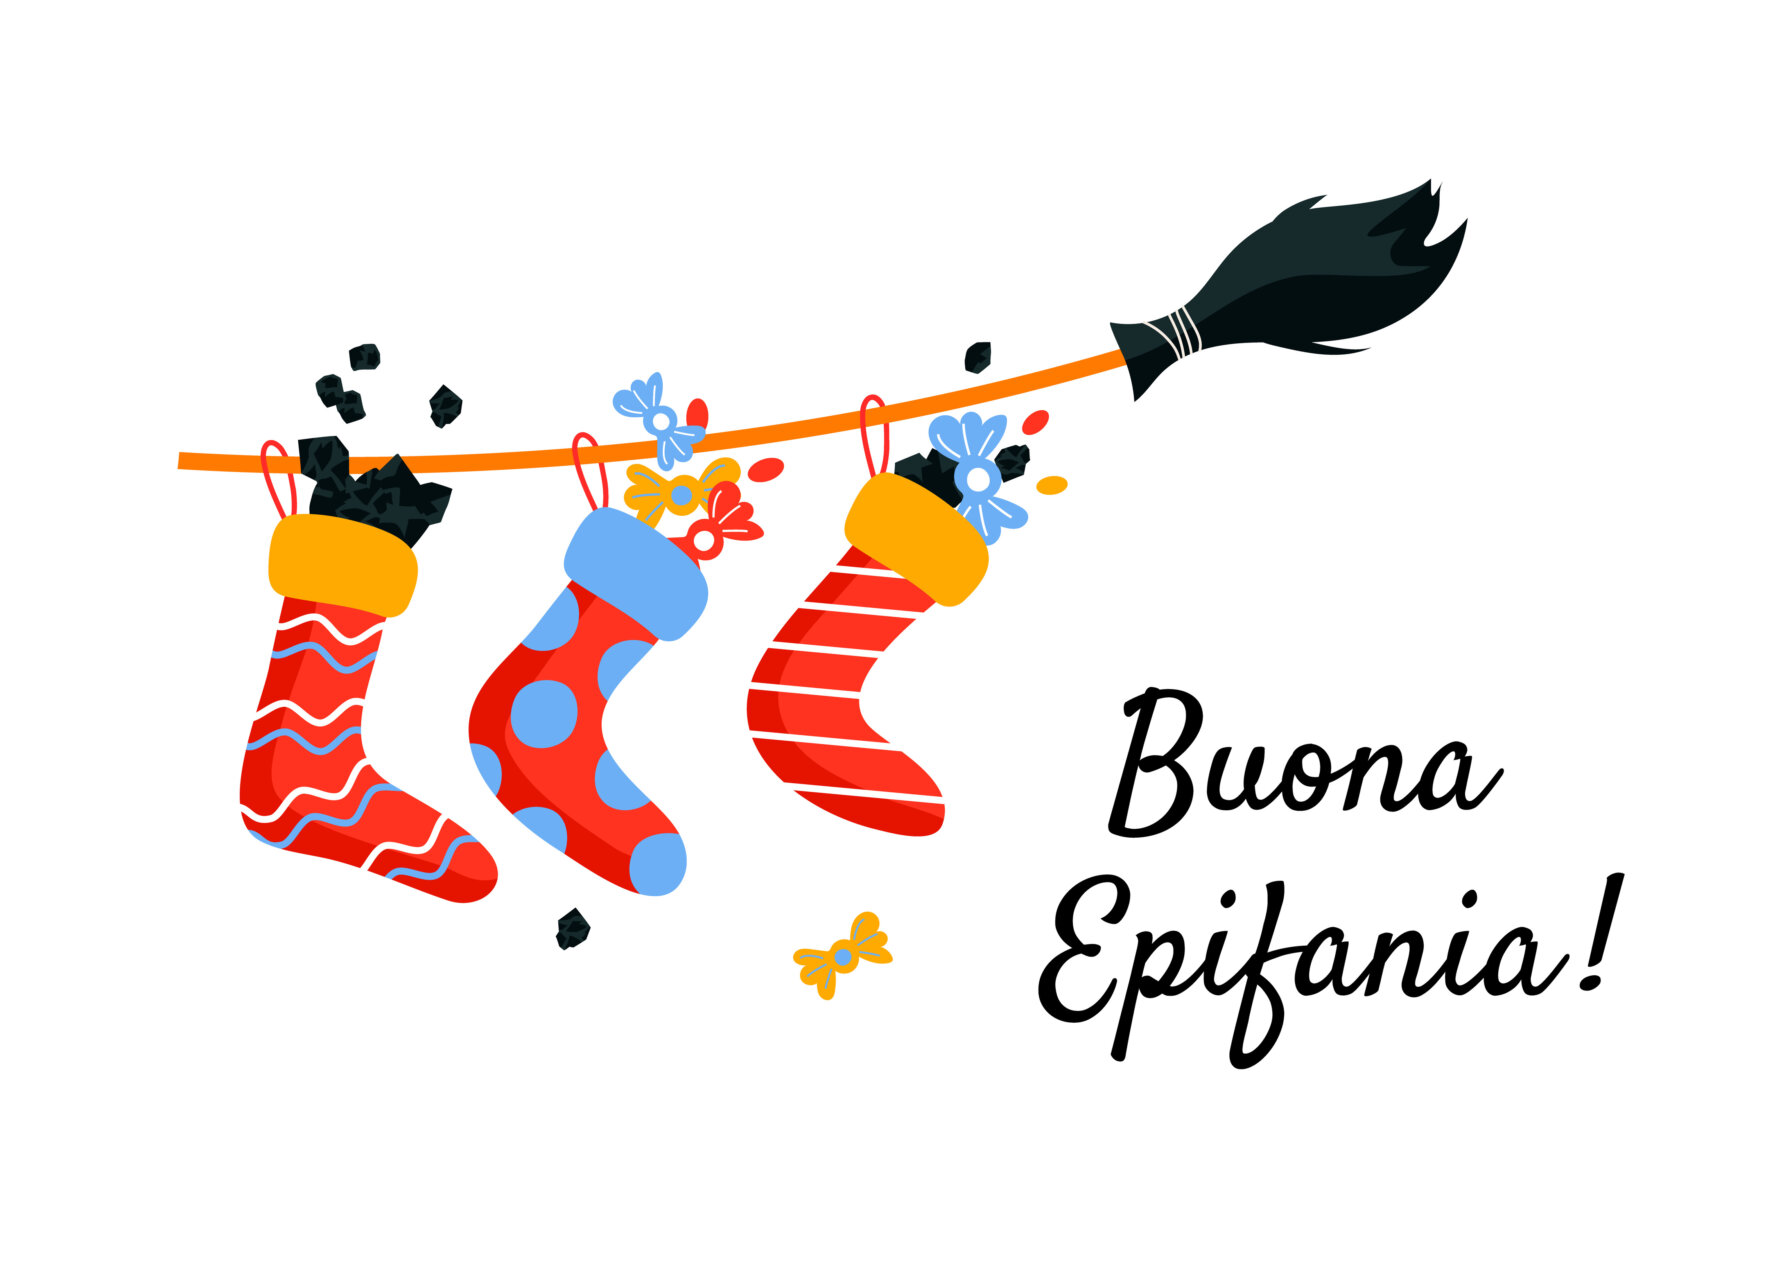 Good Epiphany. Greeting card with full socks of coals and sweets flying on broom.